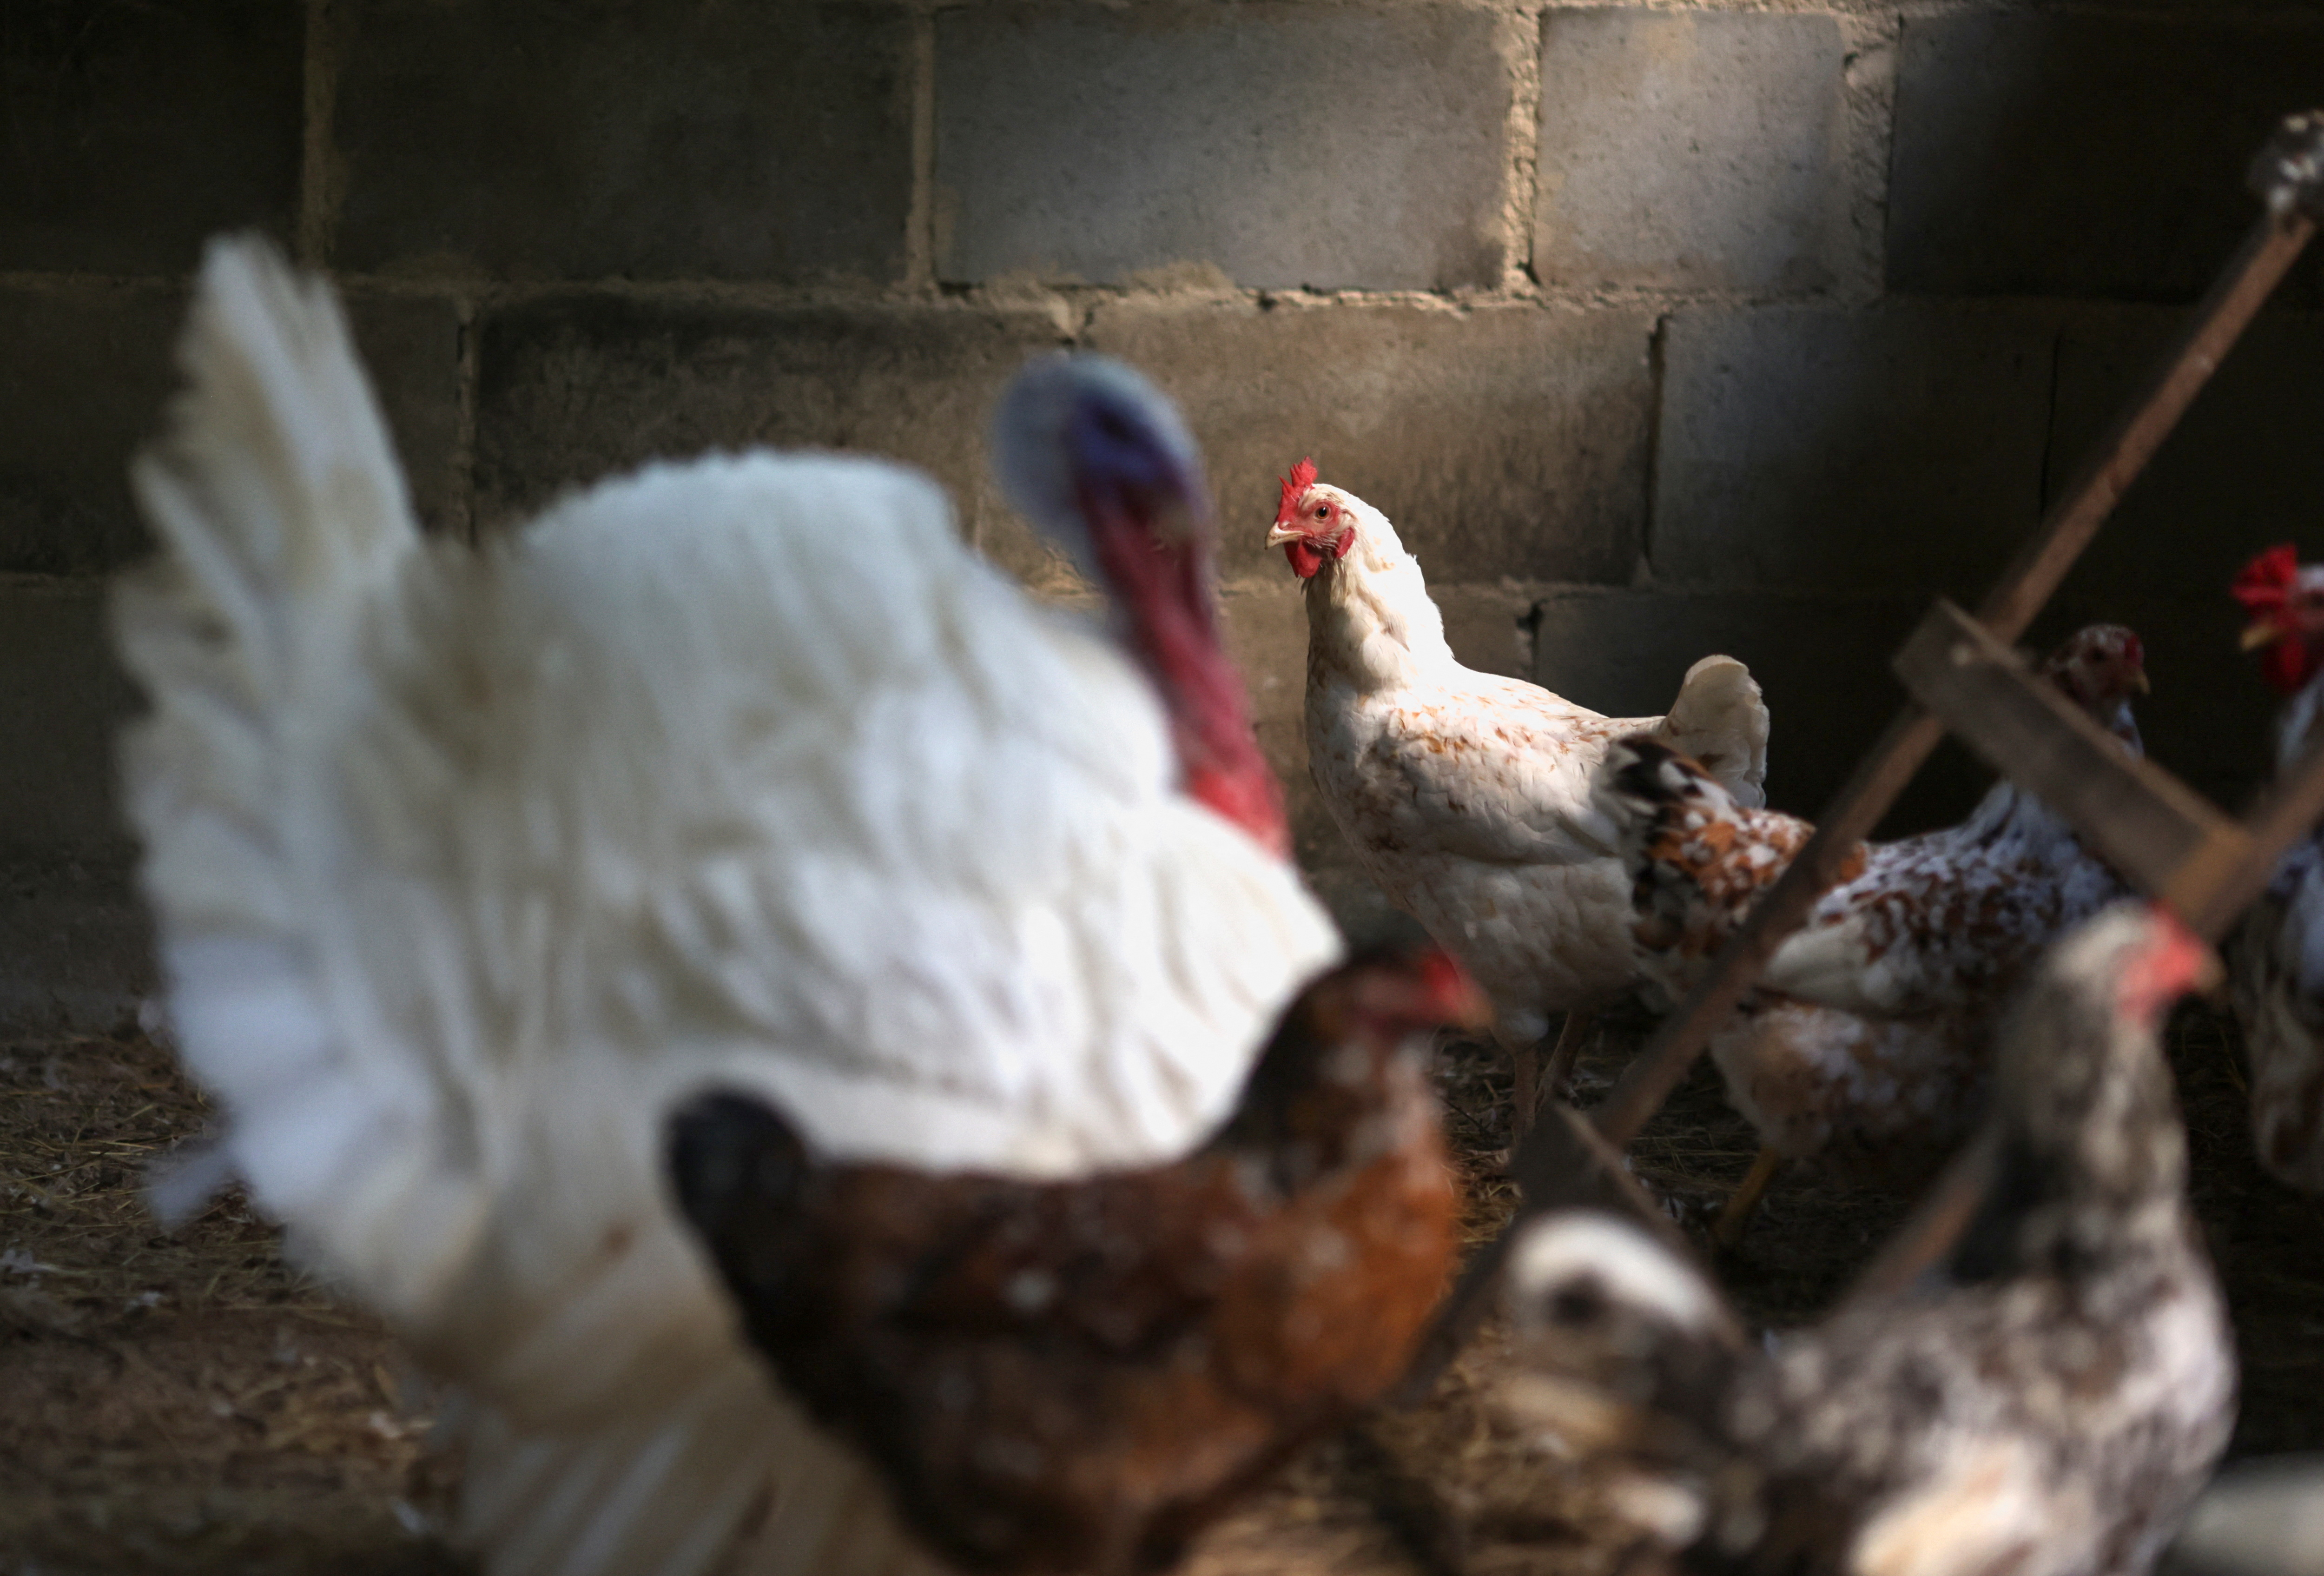 Chickens and a turkey are seen inside a coop at a private poultry farming at a ranch in Rio de Janeiro